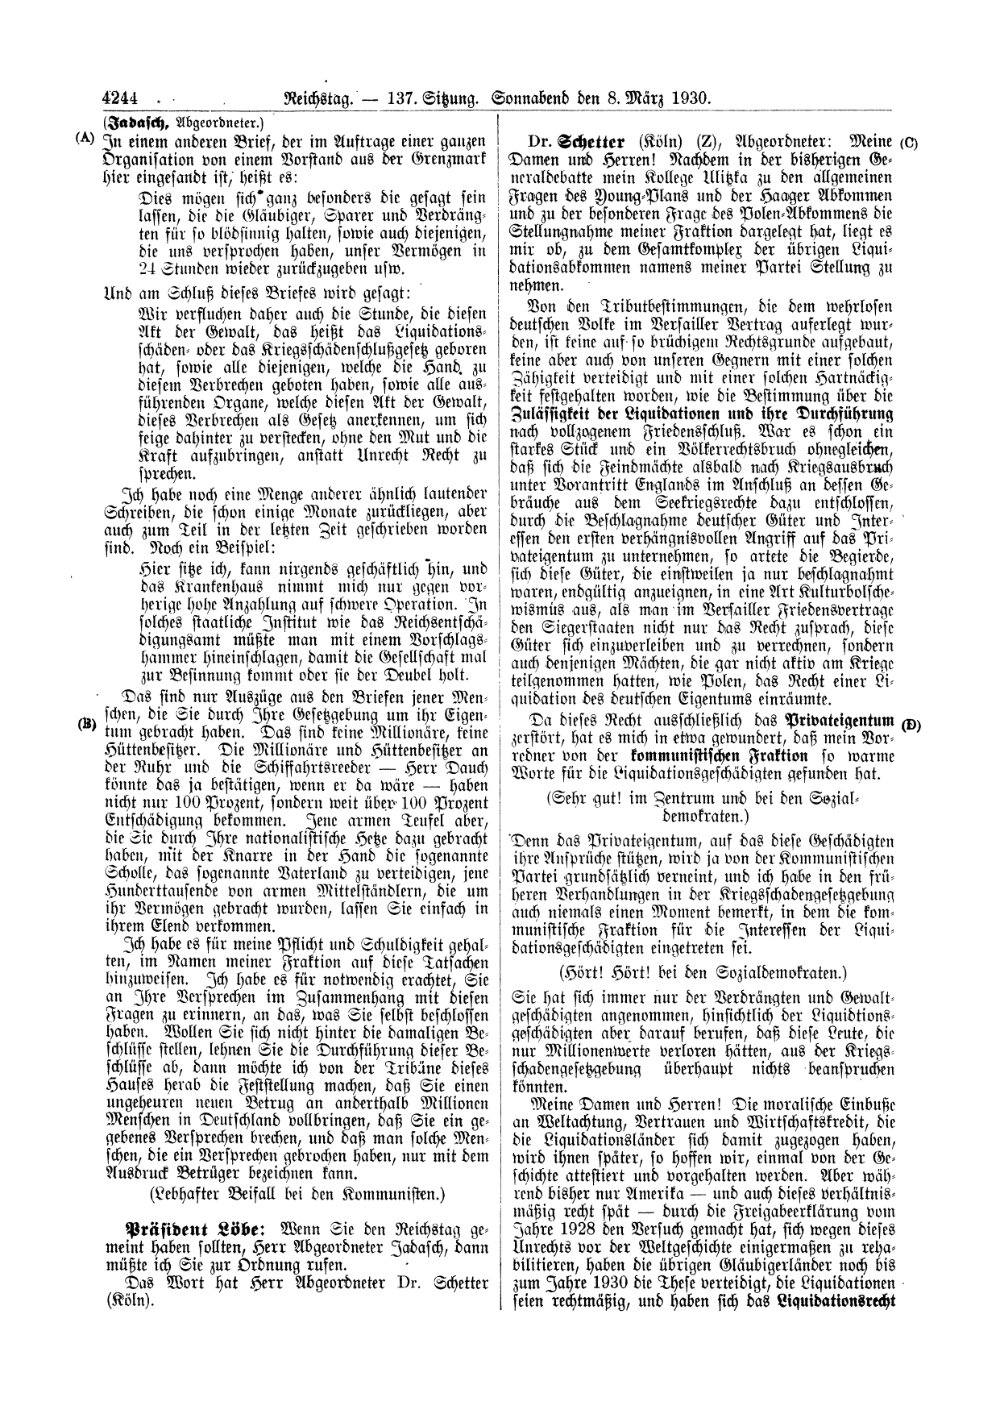 Scan of page 4244